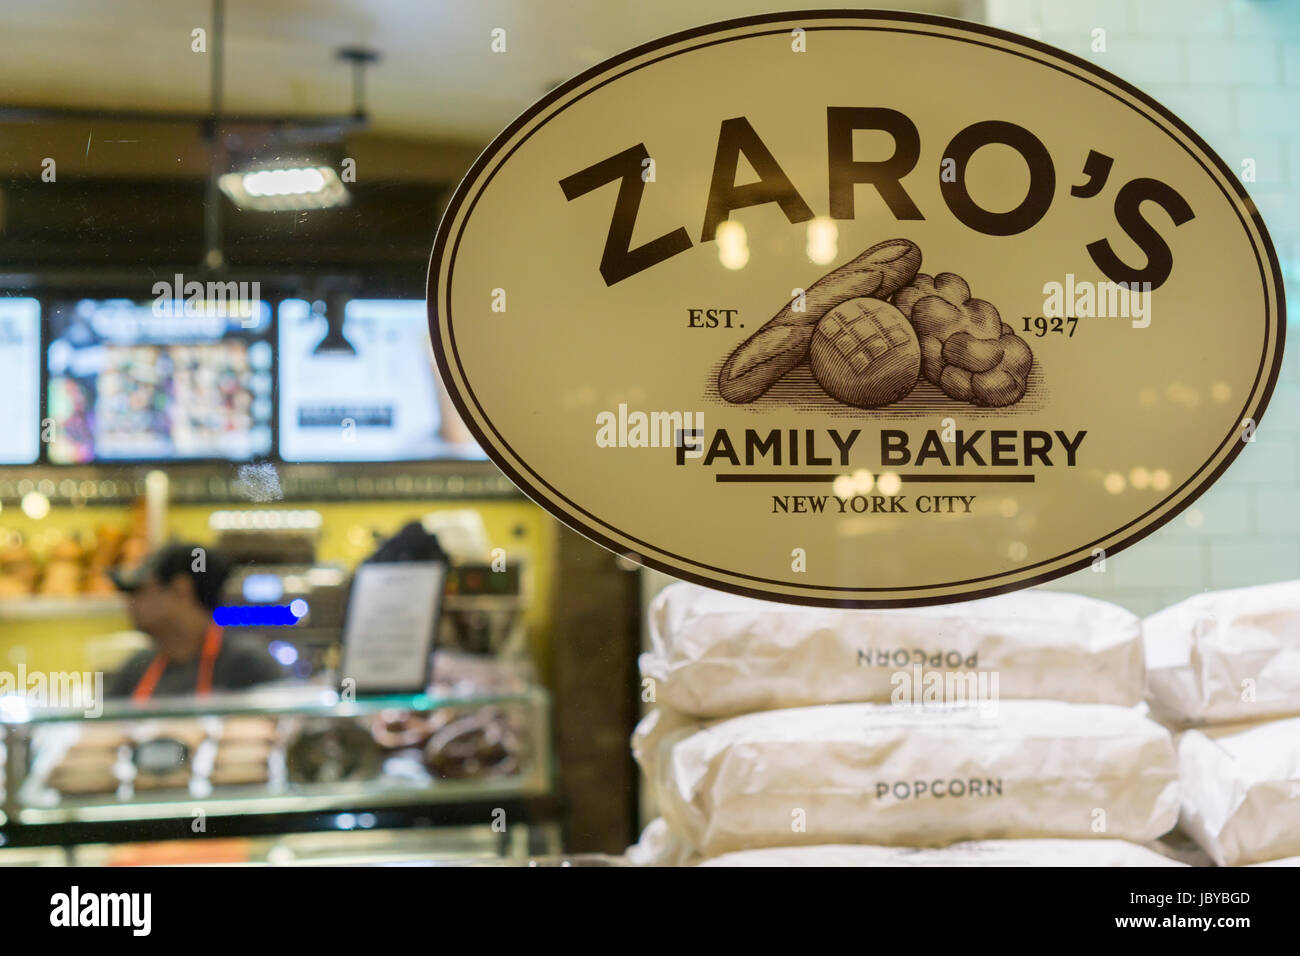 A Zaro's bakery store in Grand Central Terminal in New York on Thursday, June 8, 2017. The bakery, founded in the Bronx recently celebrated 40 years serving commuters in Grand Central Terminal. Zaro's is a family-owned company founded in the Bronx in New York in 1927. (© Richard B. Levine) Stock Photo